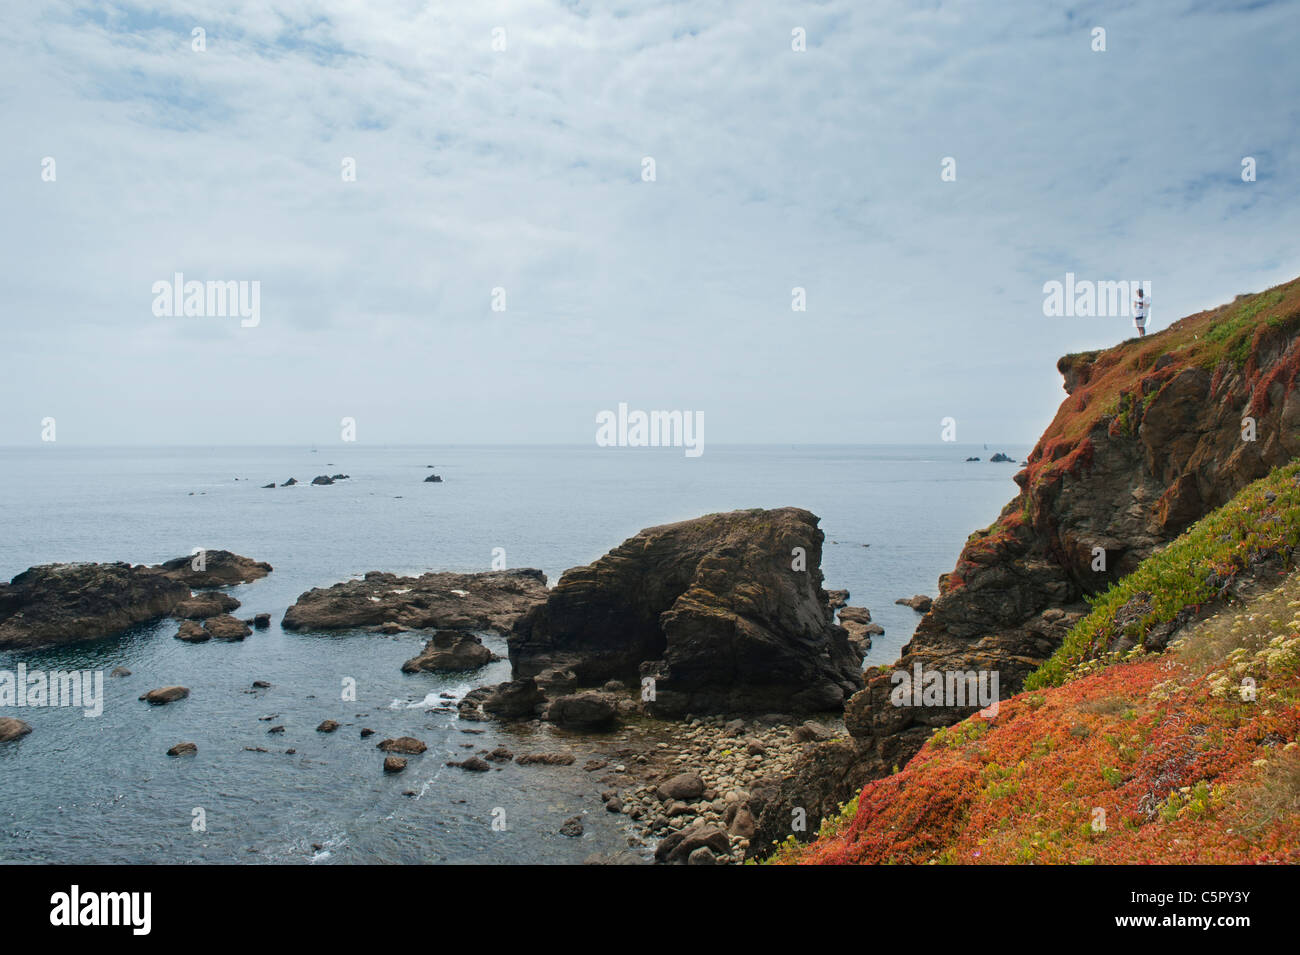 Rocks meet the sea at the coast at Lizard Point, Cornwall, watched by a man stood on a nearby cliff. Stock Photo